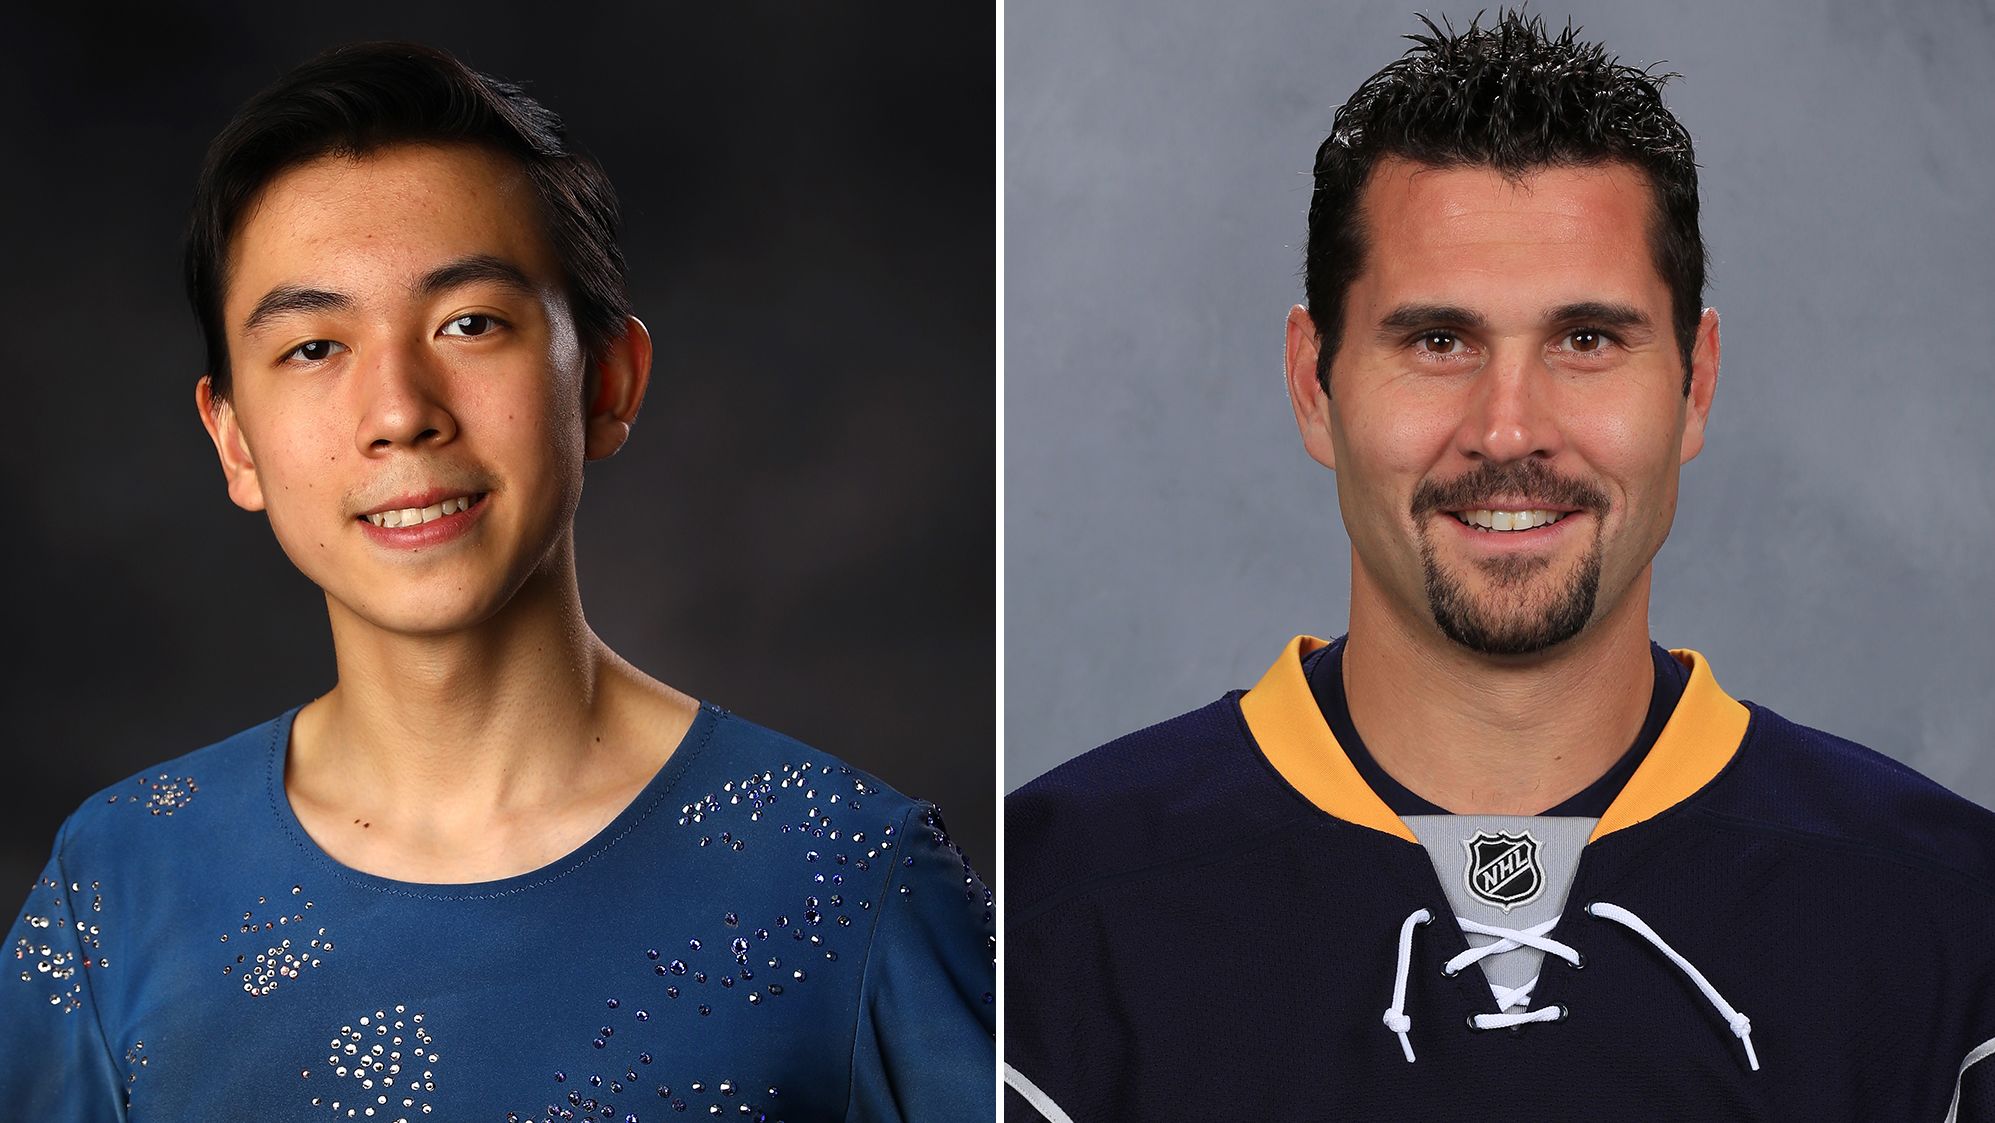 On the left, Vincent Zhou, 17, is this year's youngest US Olympian and Brian Gionta, 39, is the oldest.